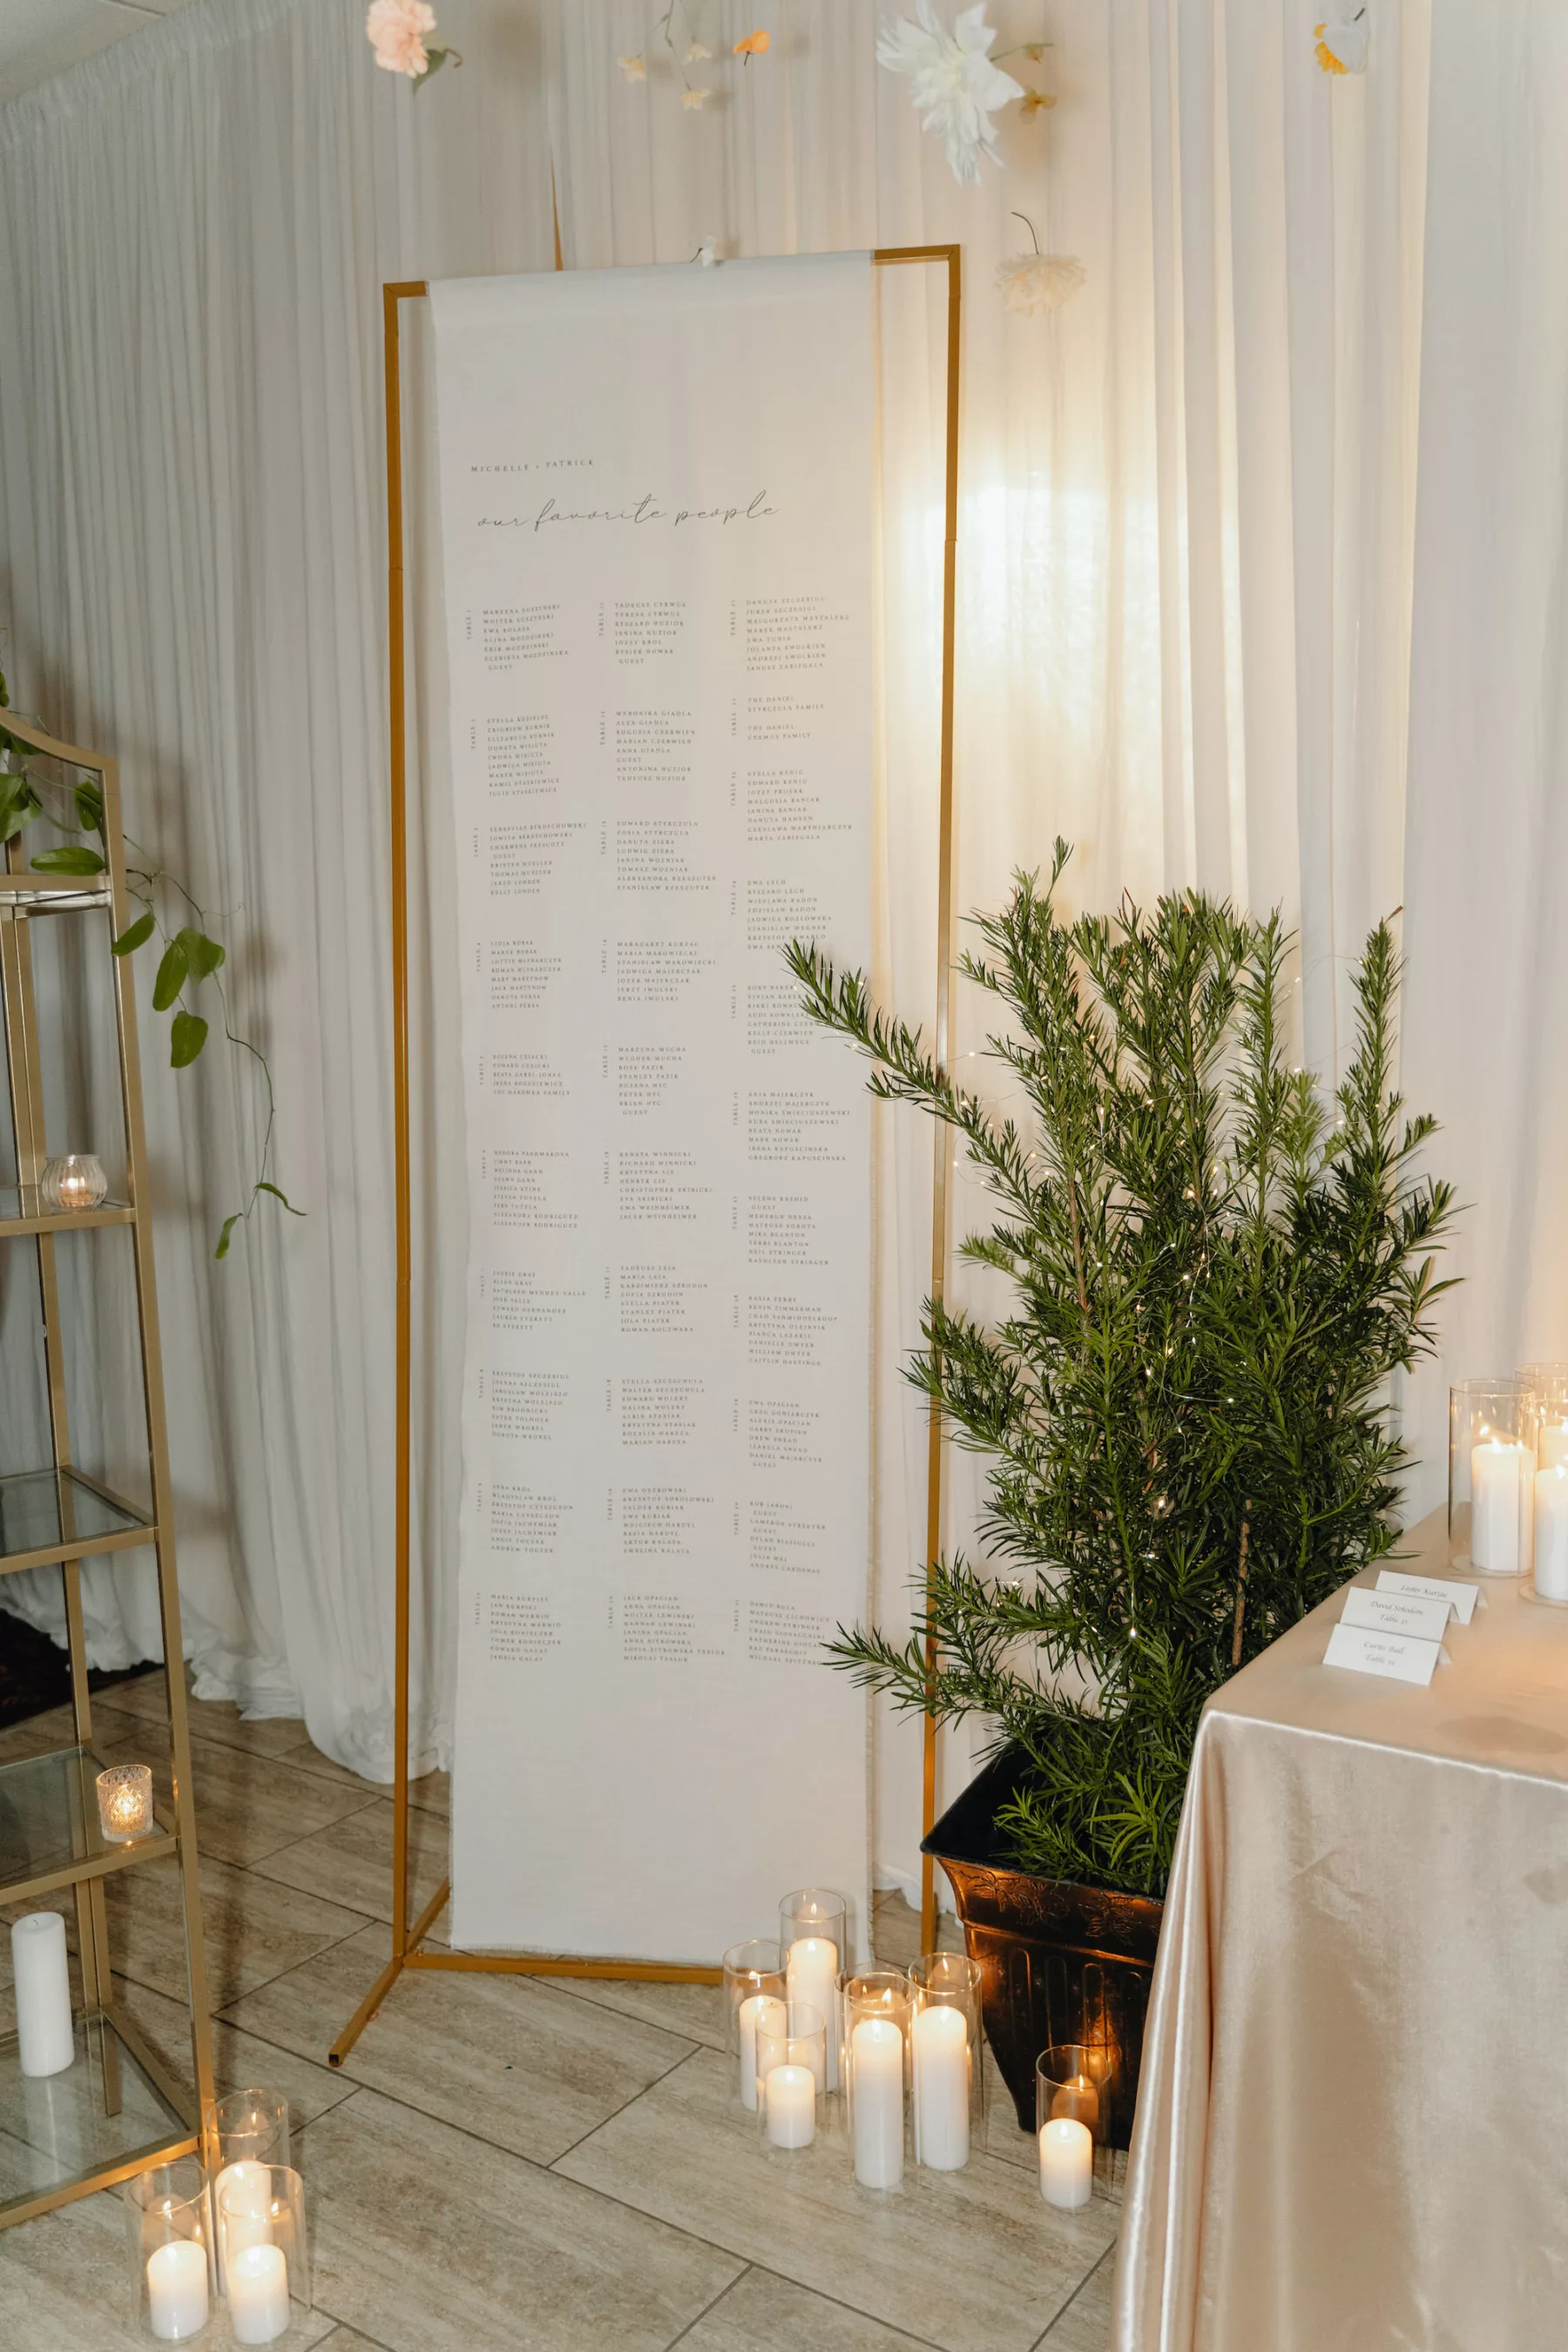 Elegant White and Gold Wedding Reception Seating Chart Banner Ideas